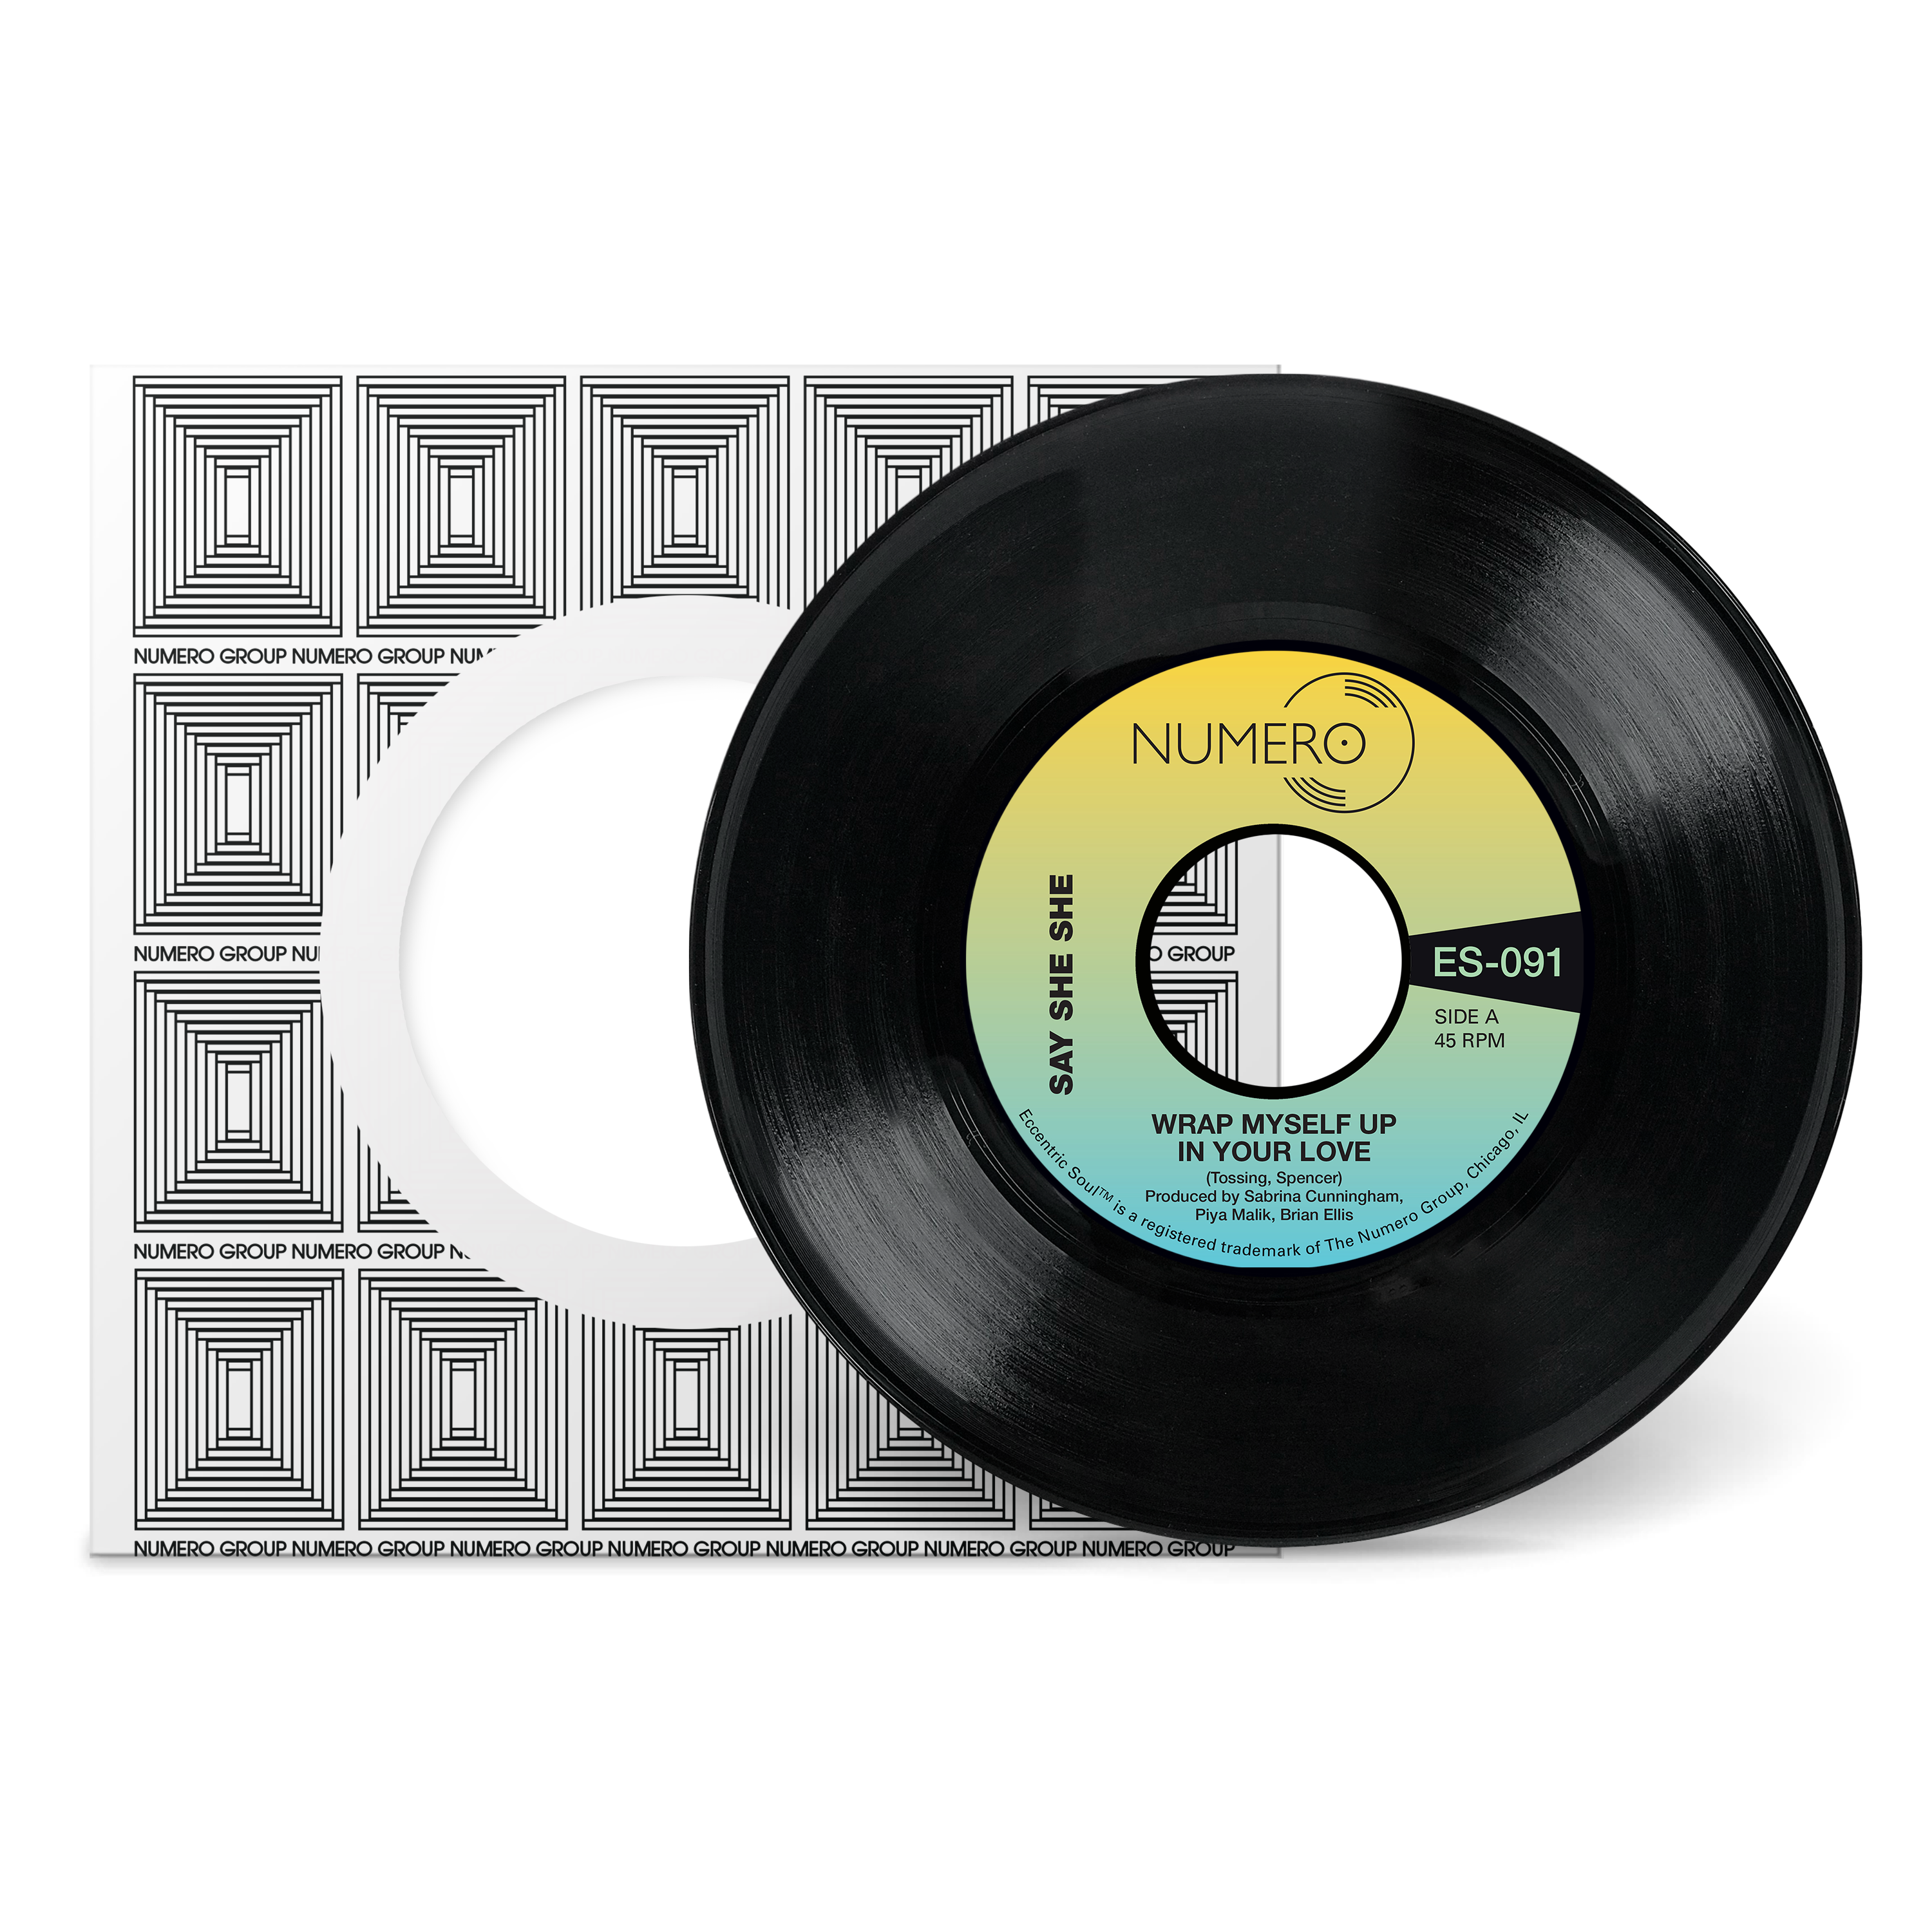 Say She She, Jim Spencer - Wrap Myself Up In Your Love: Vinyl 7" Single